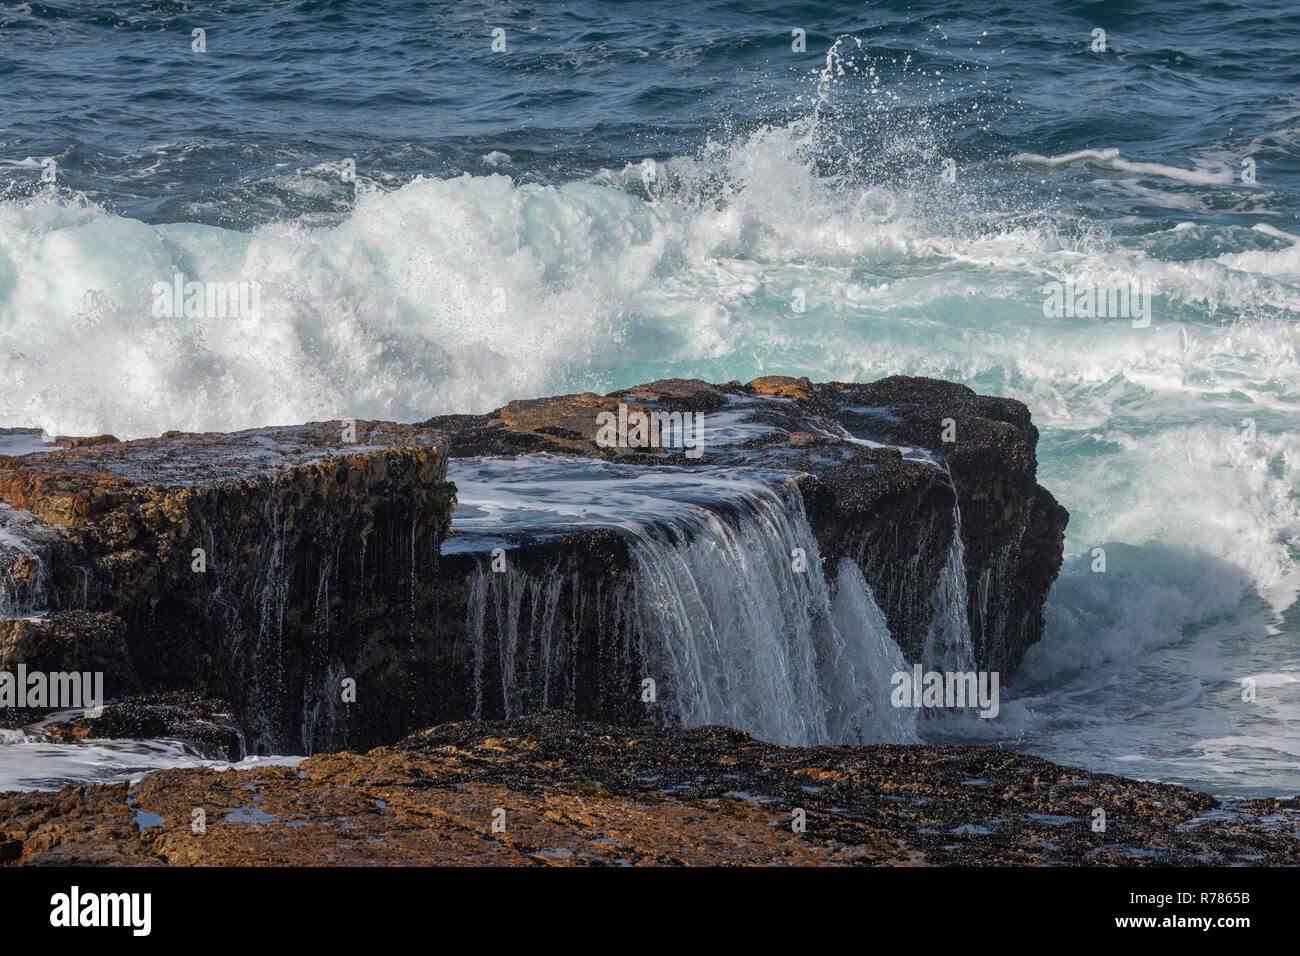 Waves breaking over the rocks at Hermanus, Cape, South Africa. Stock Photo